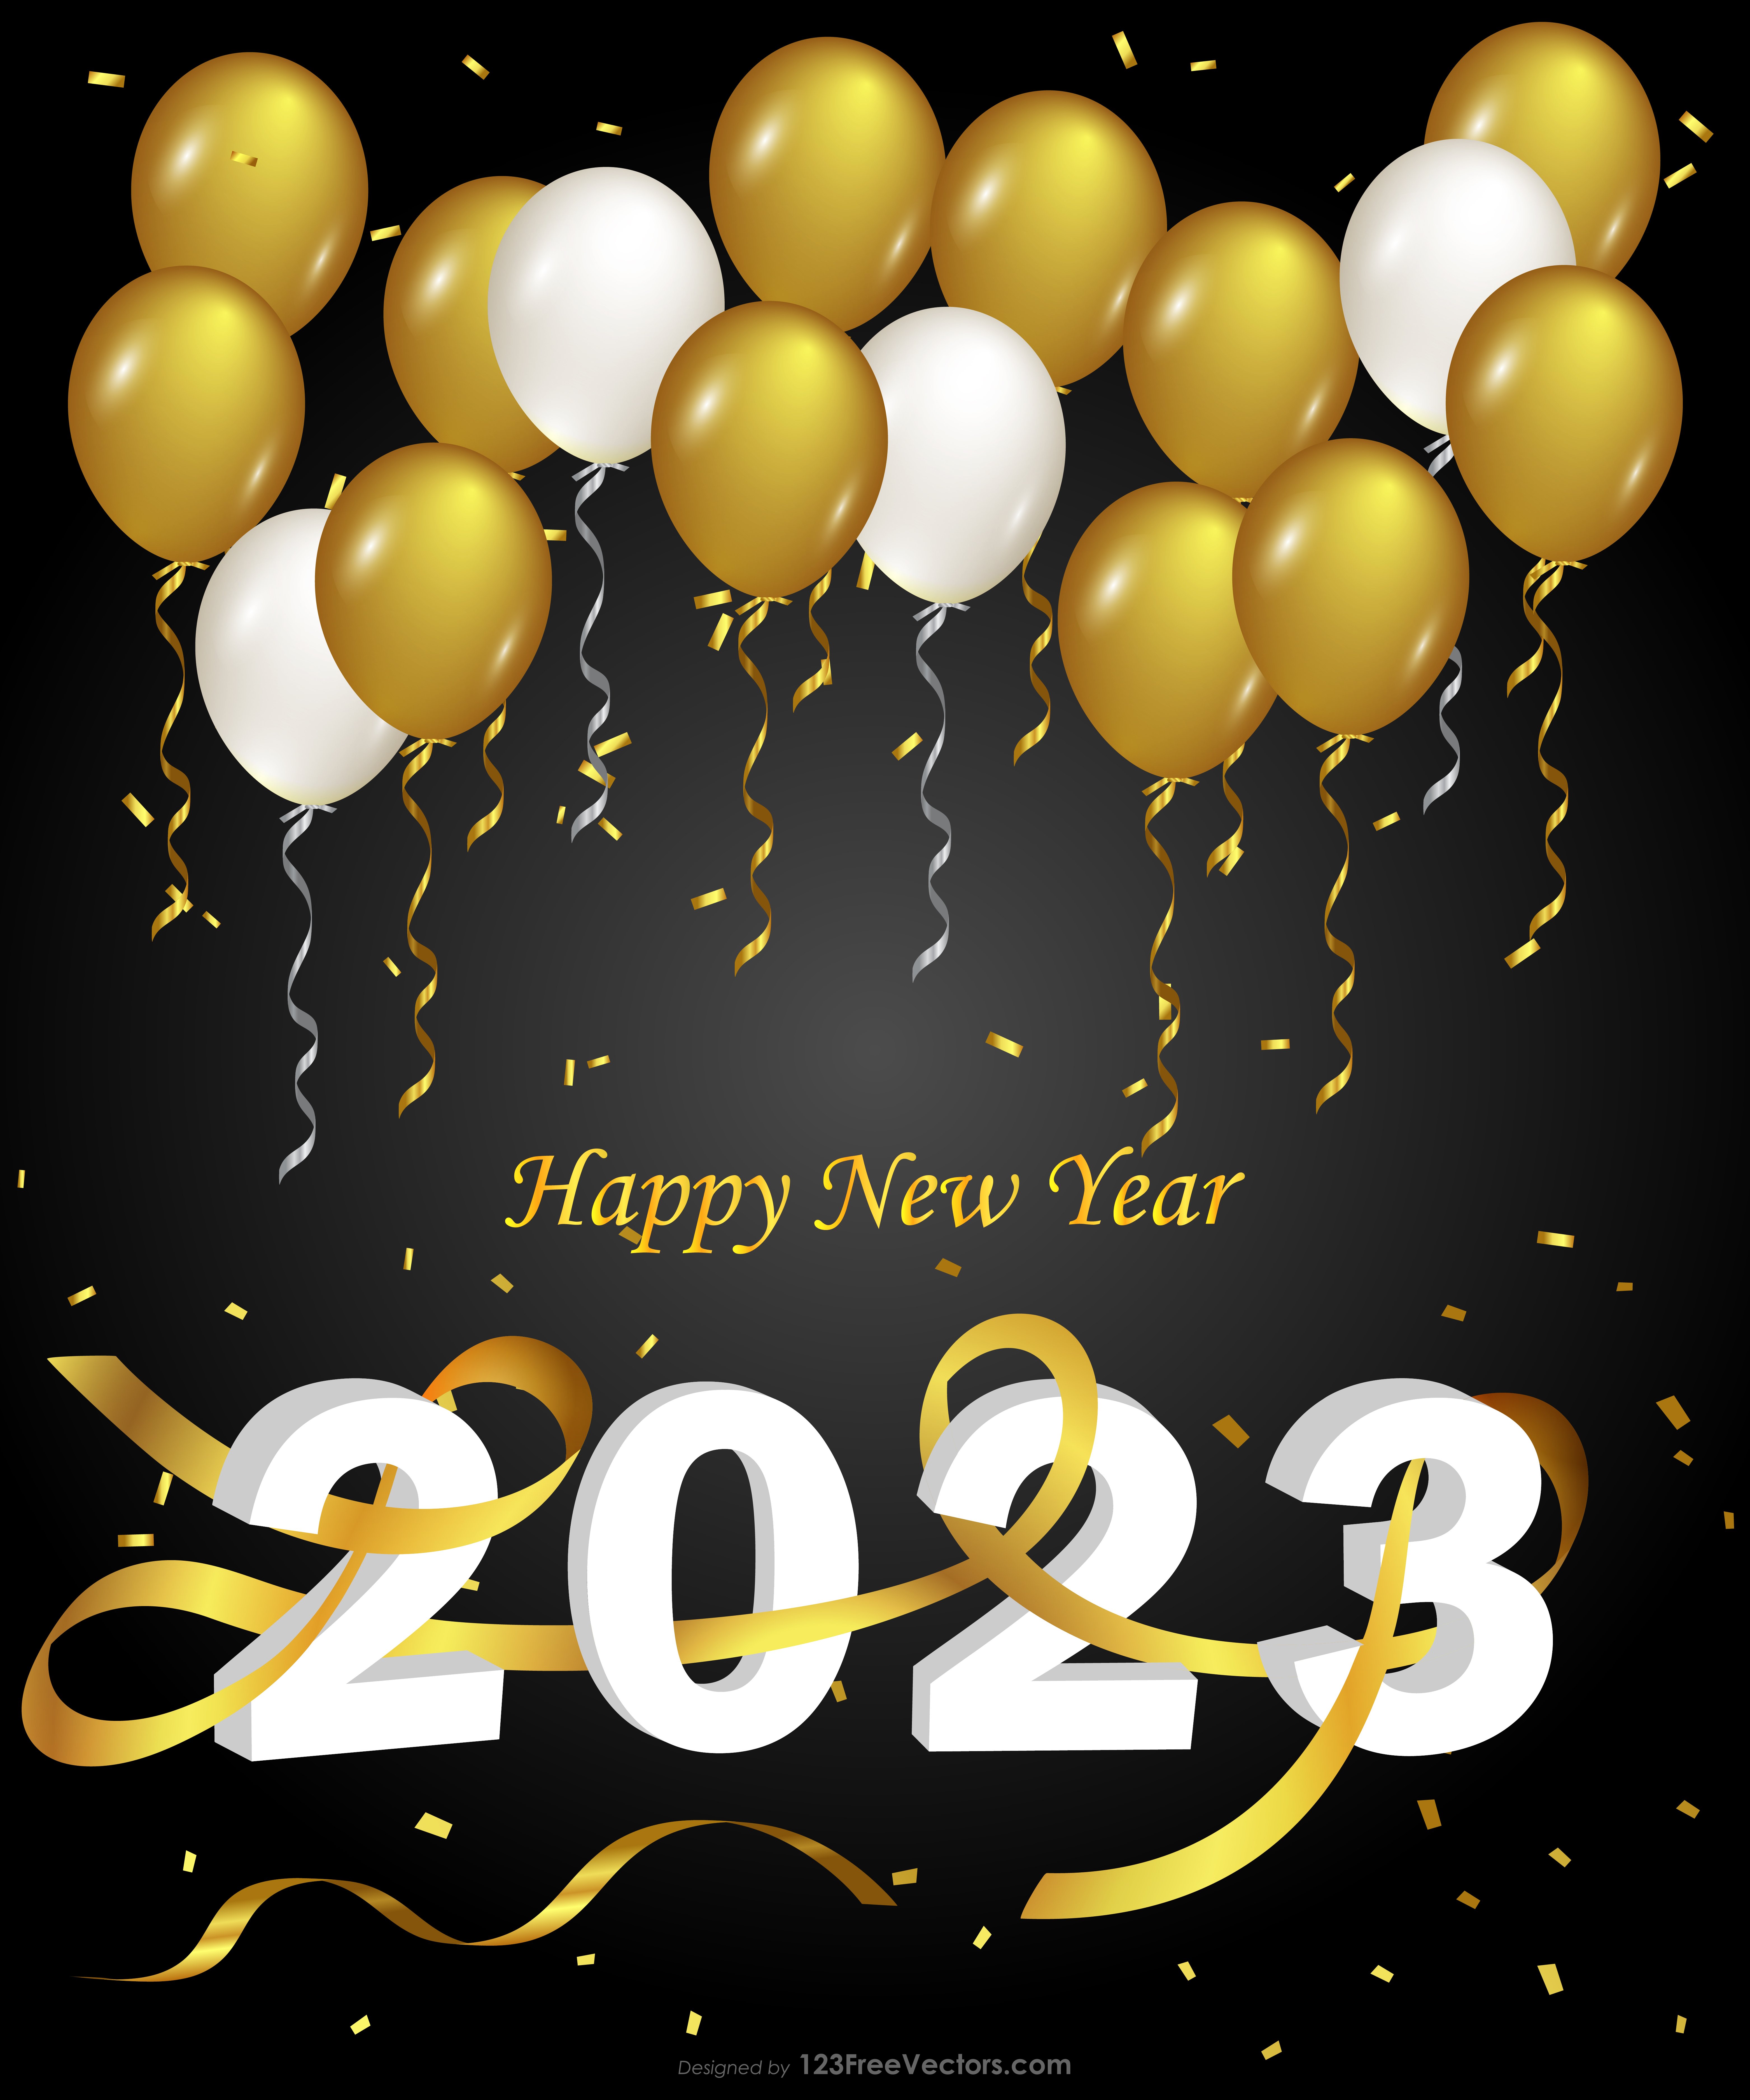 Free Happy New Year 2023 Gold Balloons on Black Background